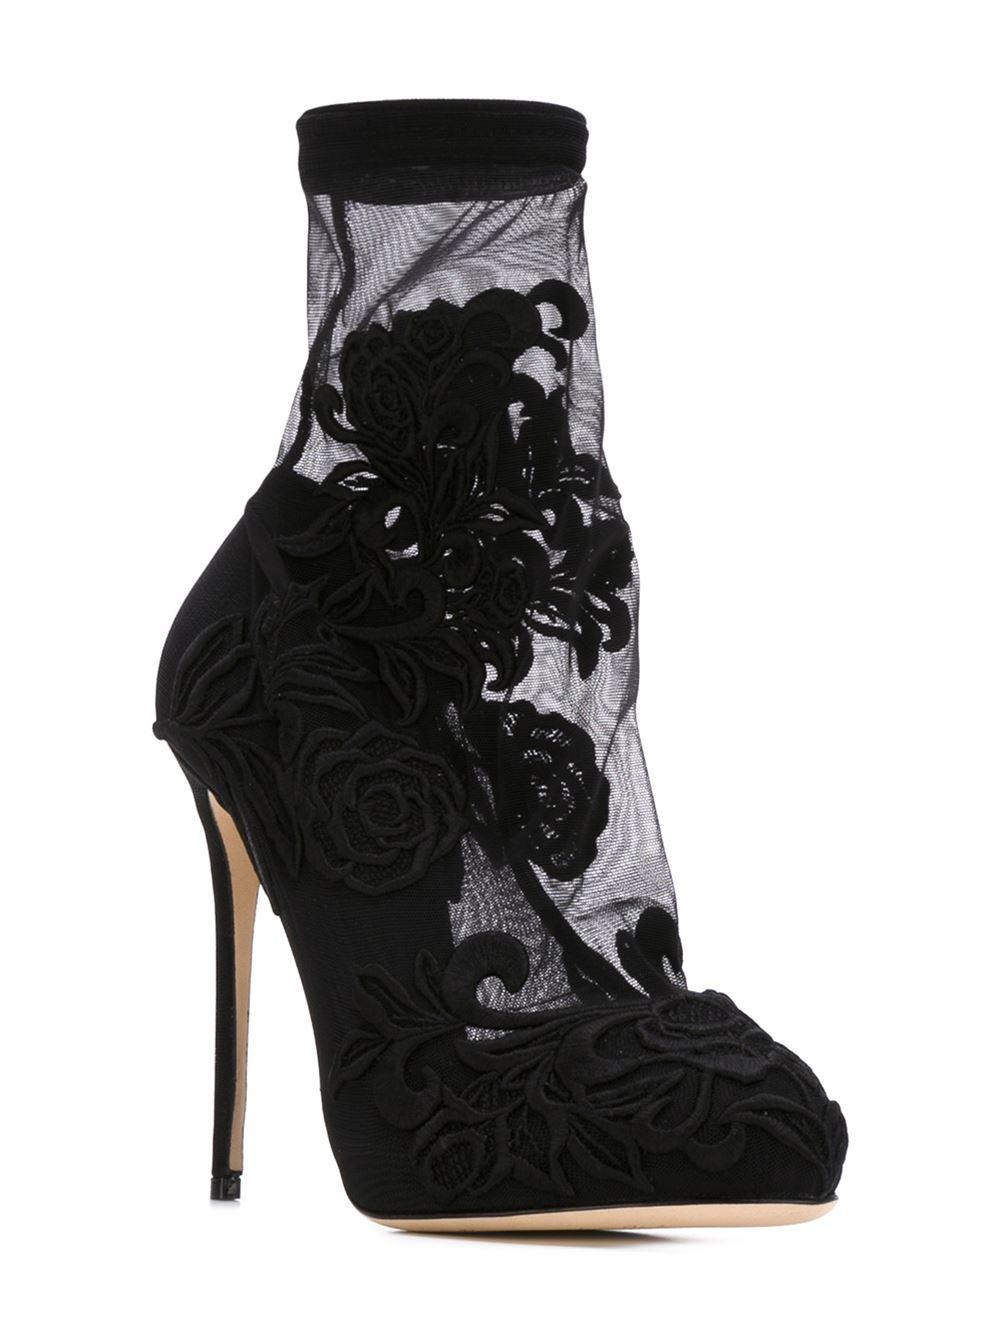 Lyst - Dolce & Gabbana Floral Embroidery Sock Booties in Black